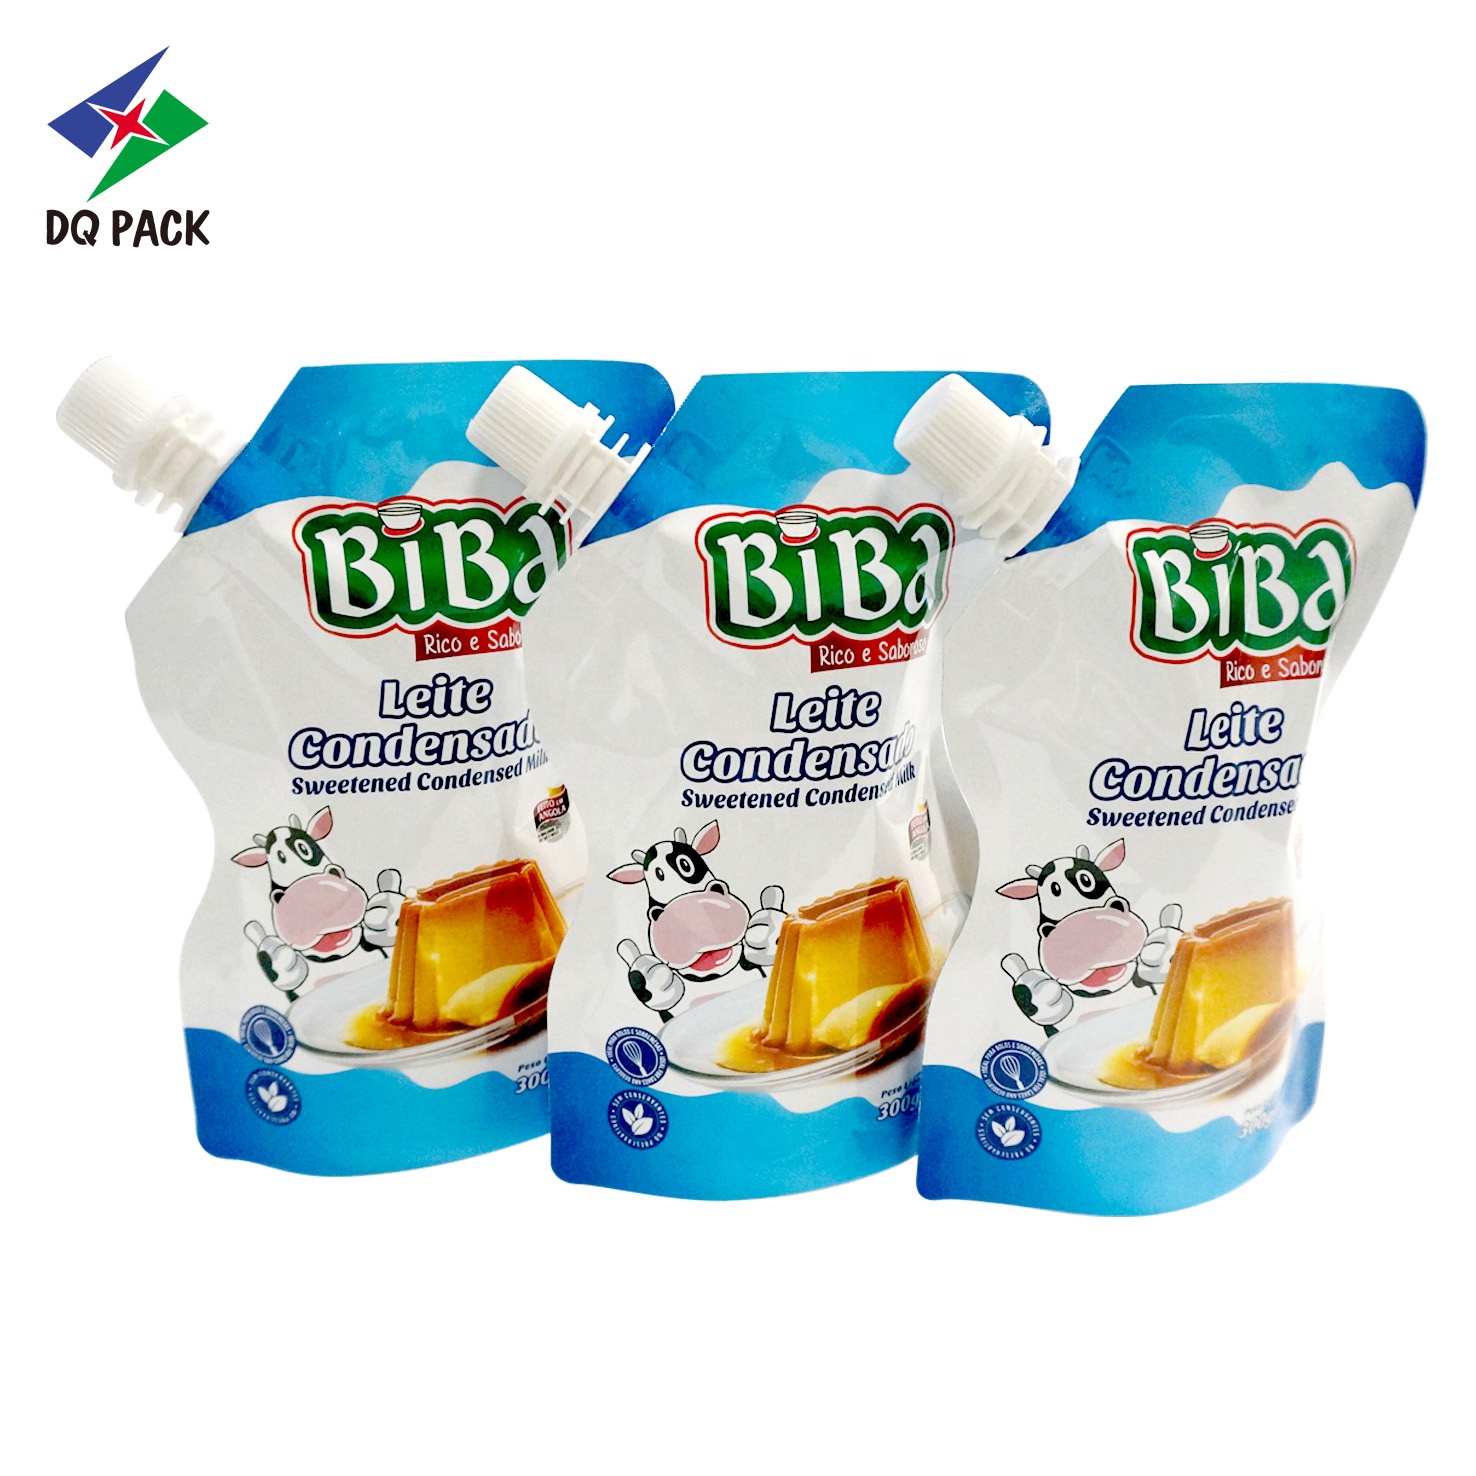 DQ PACK Custom Printed Logo Stand Up Nozzle Pouch Special Shape Spout Plastic Liquid Packaging Bag